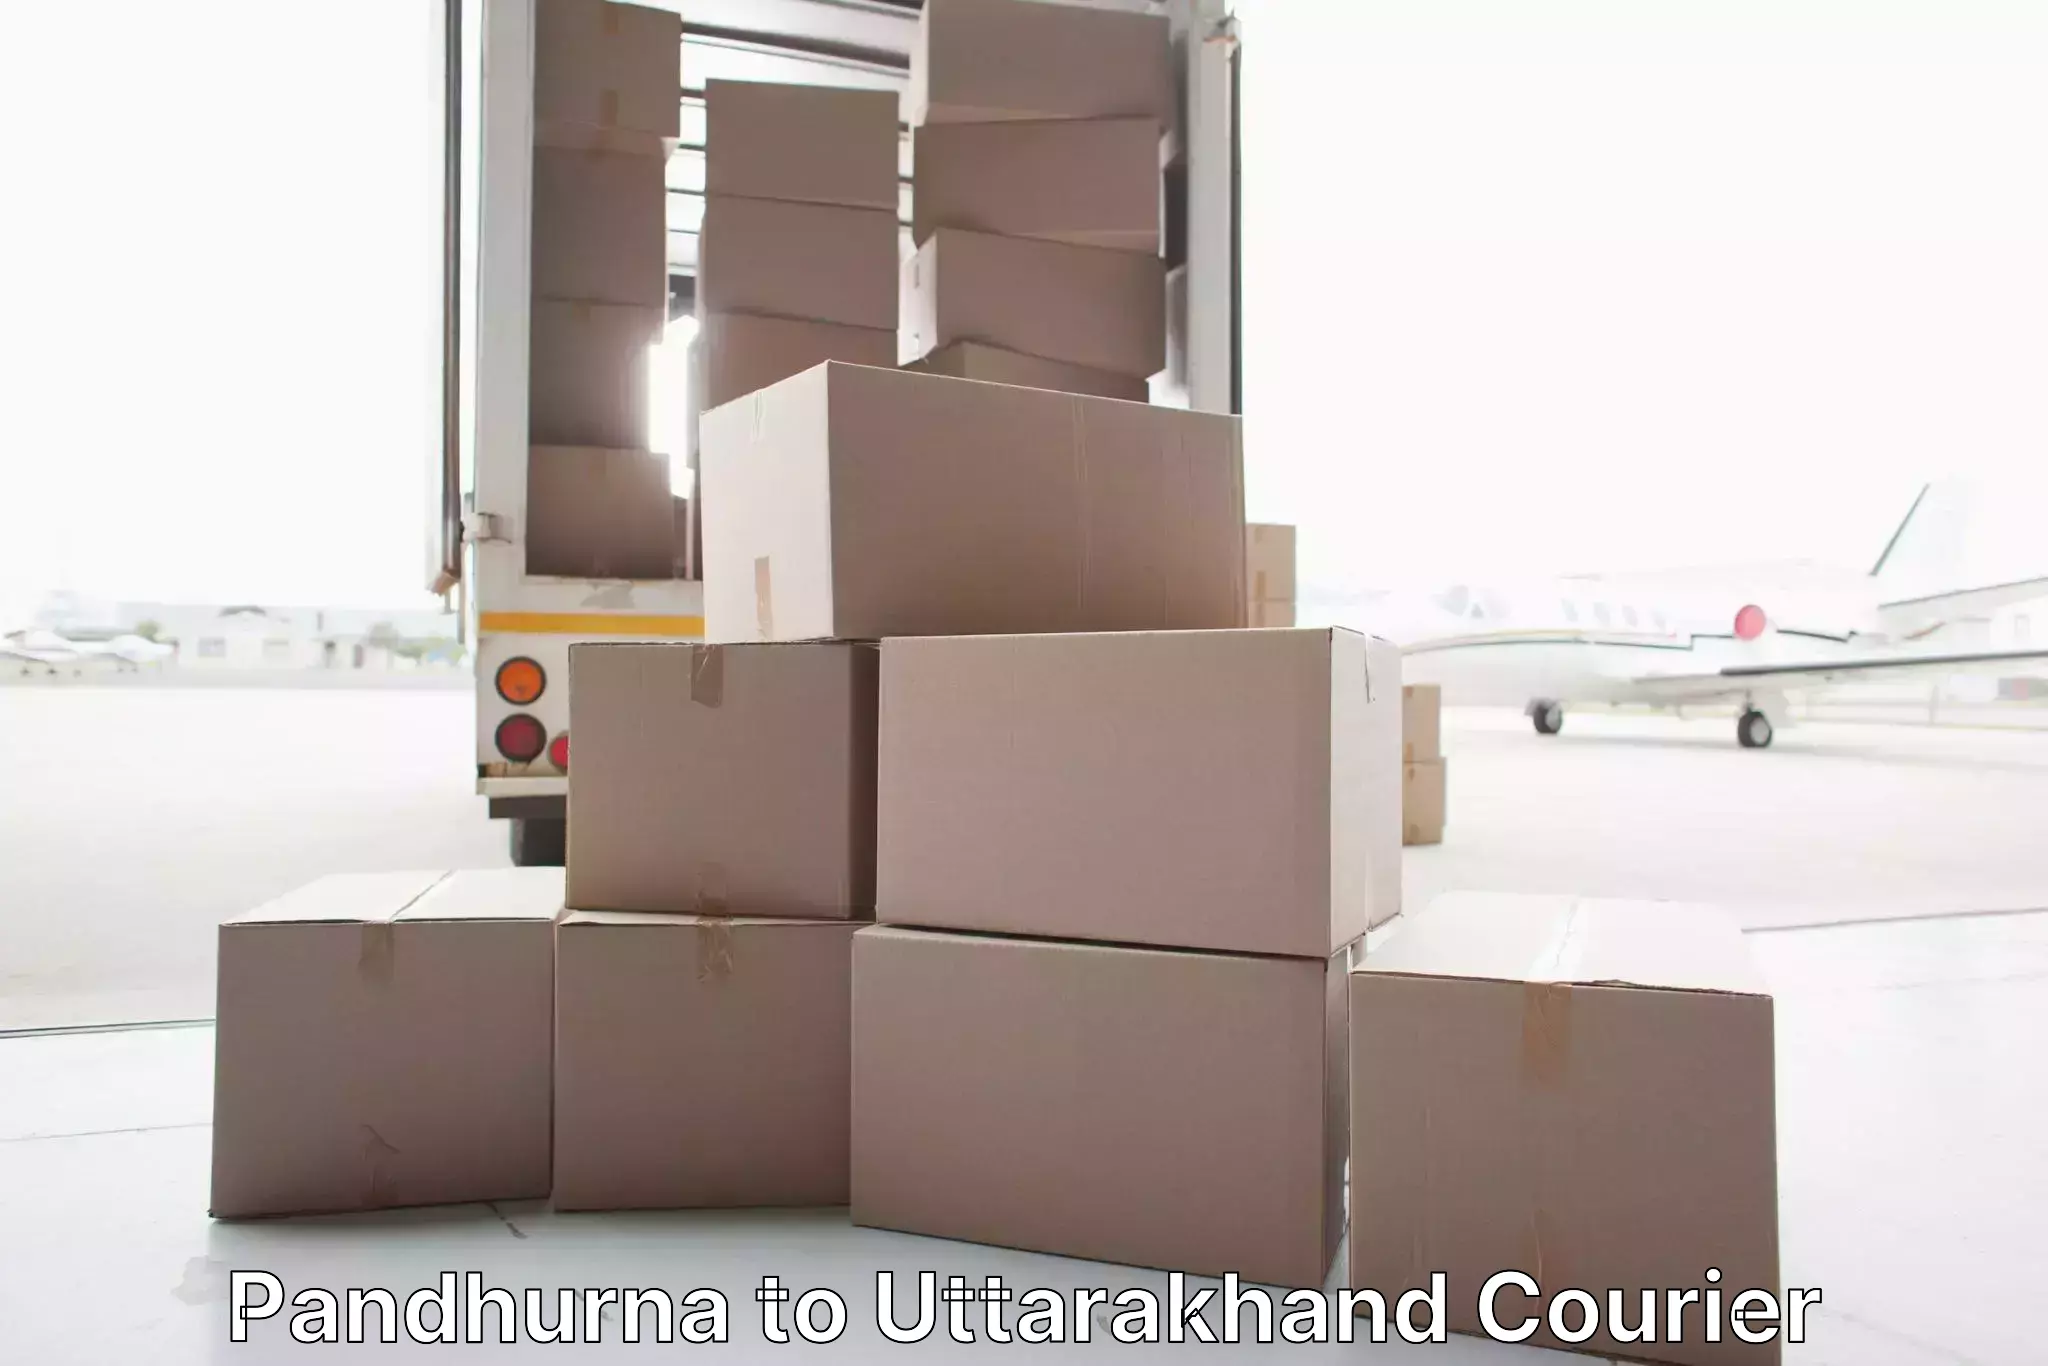 Quality relocation assistance in Pandhurna to IIT Roorkee